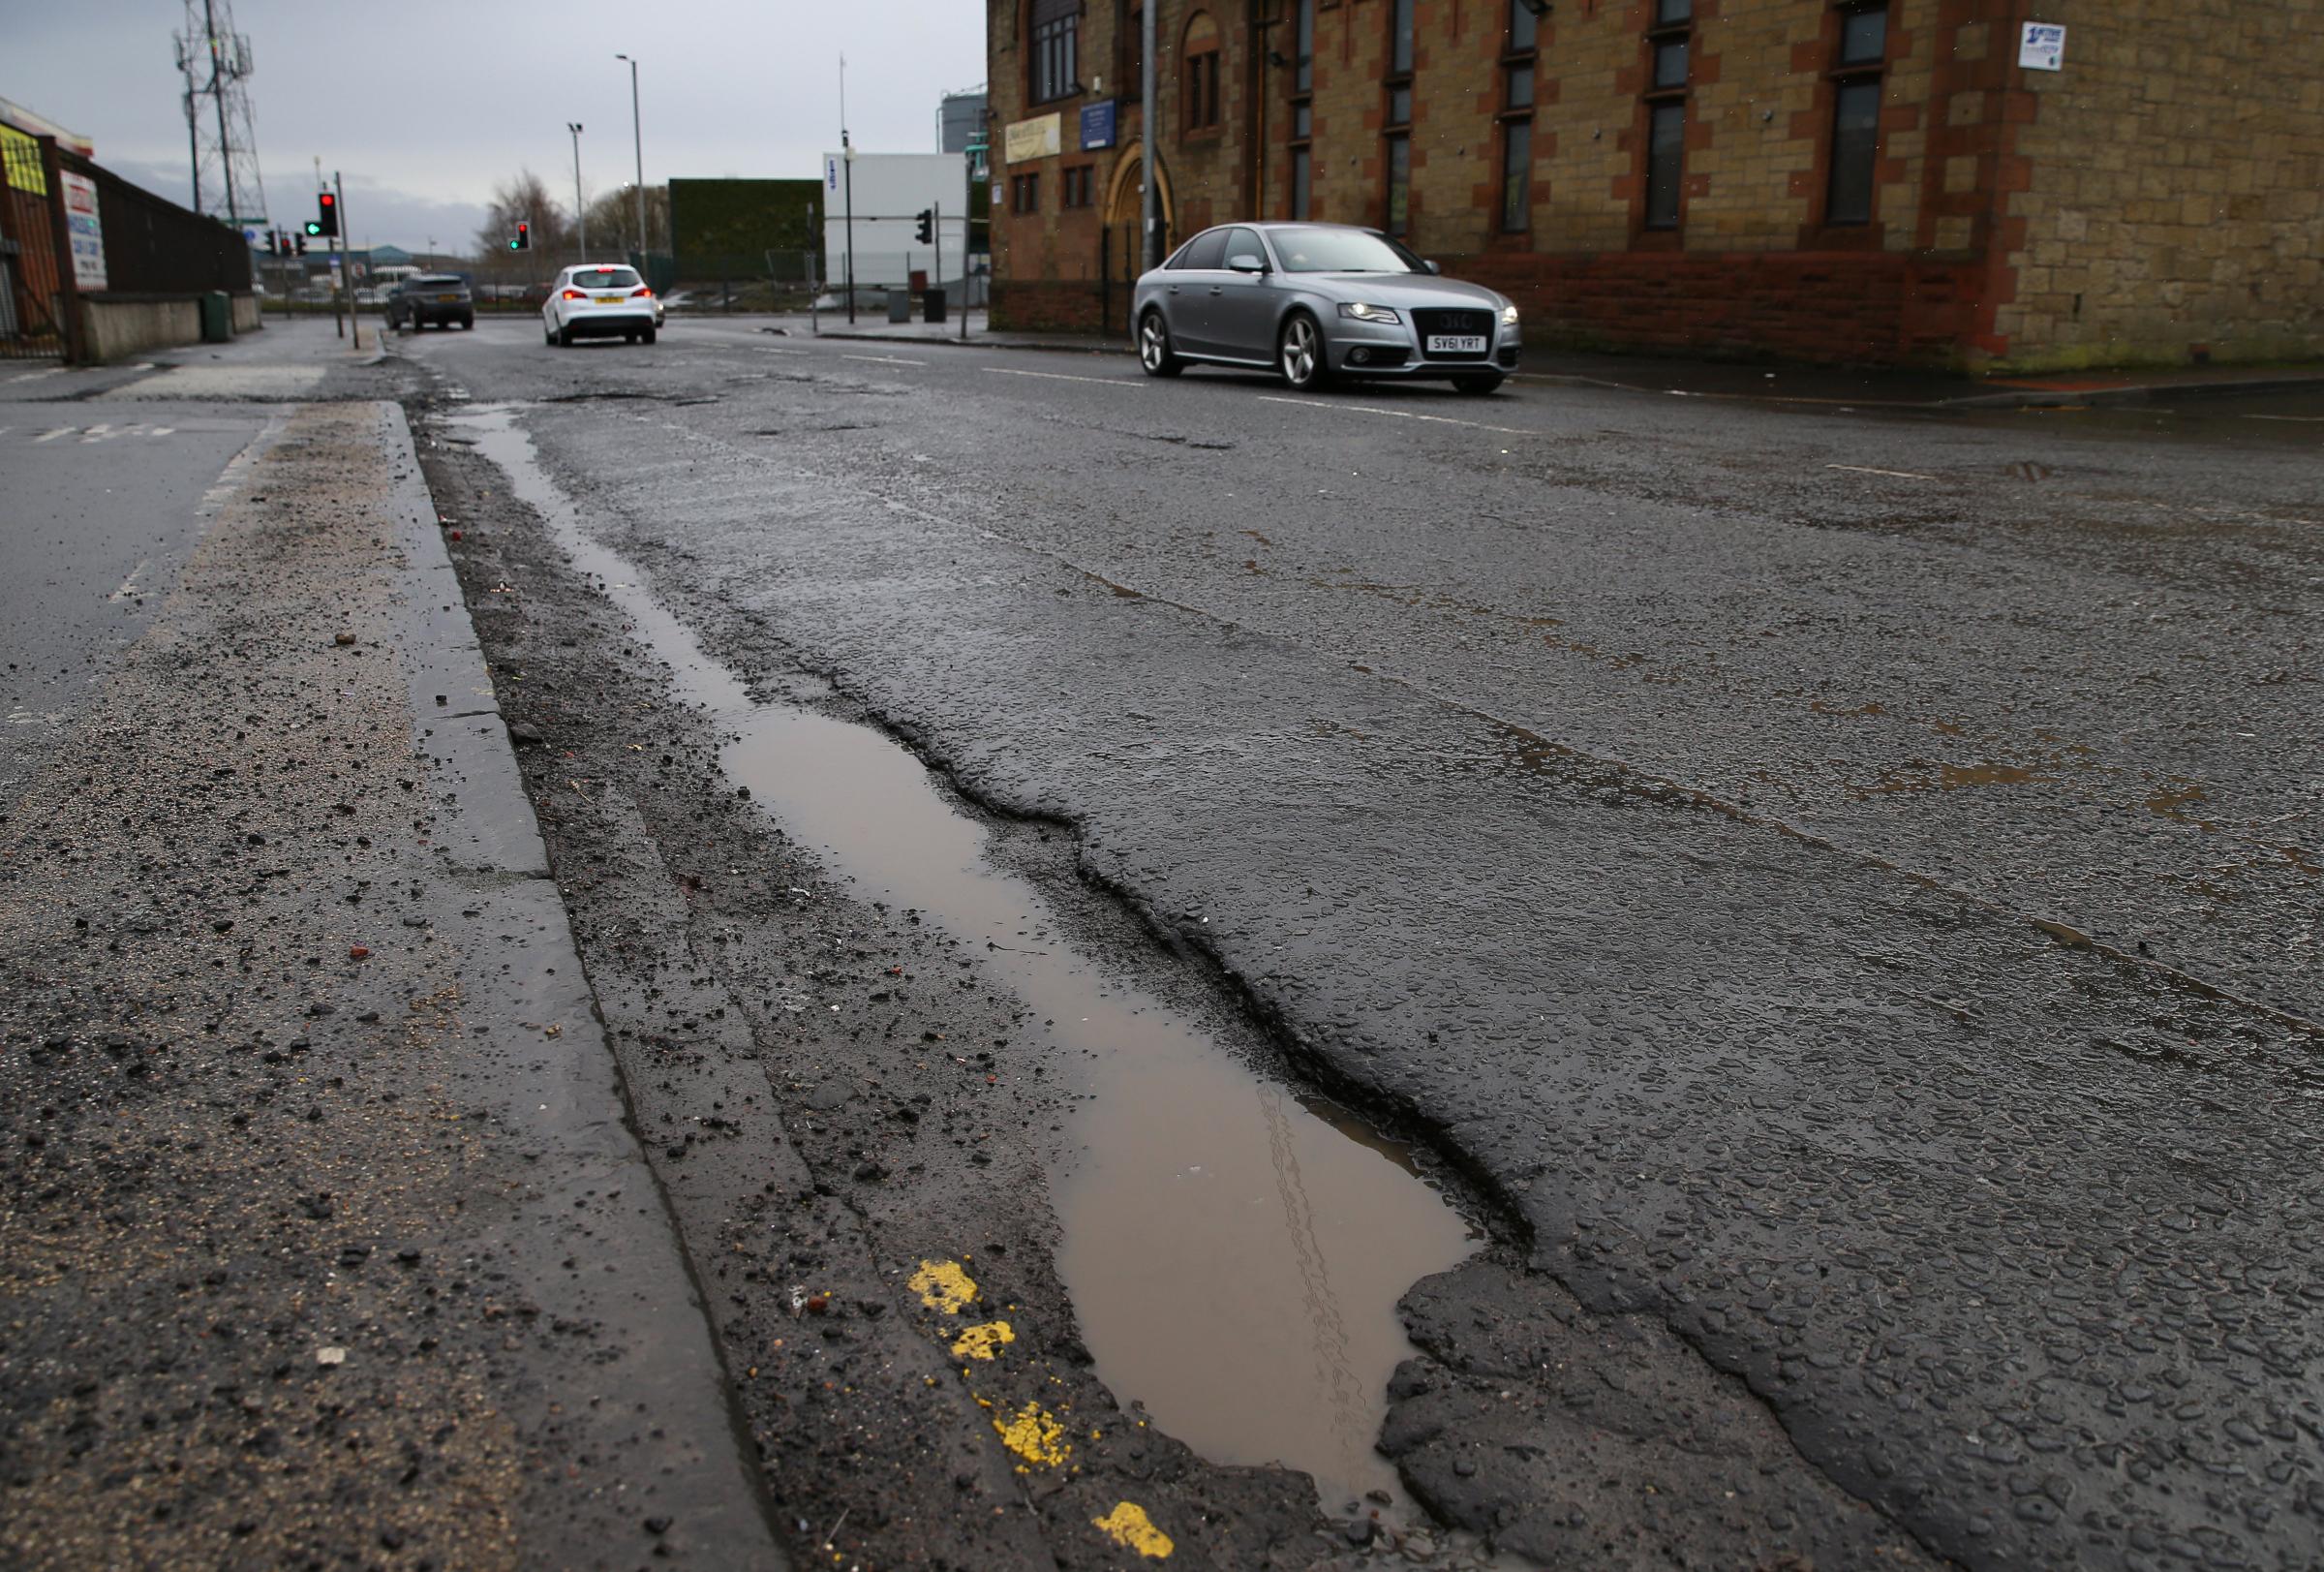 Potholes continue to be a problem for motorists